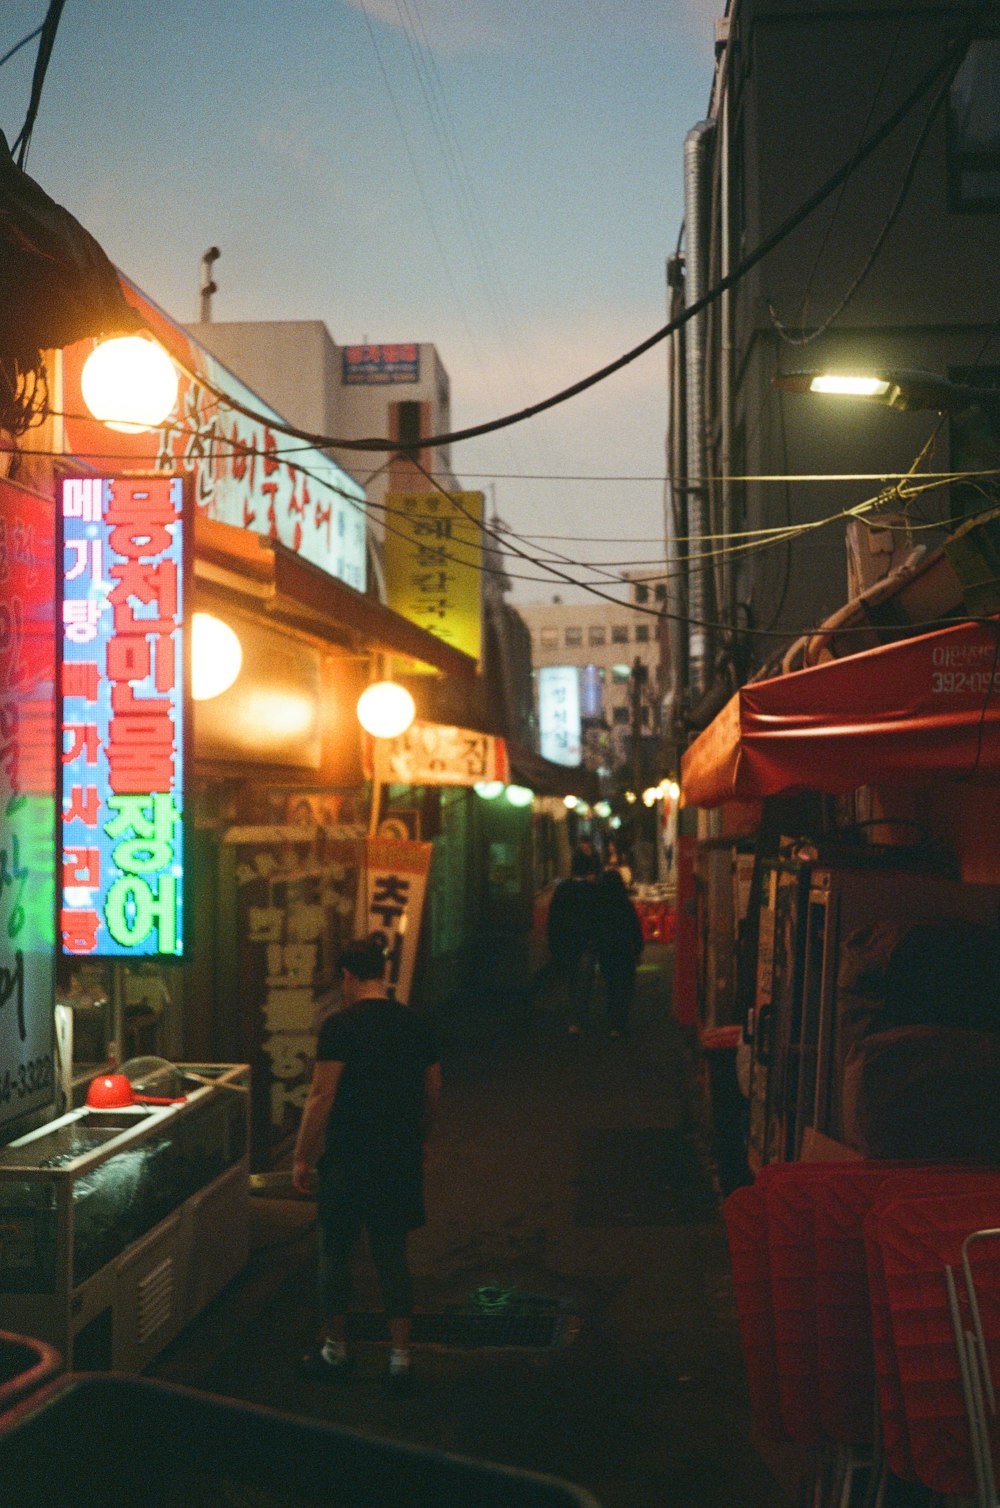 a narrow alley way with neon signs on the buildings